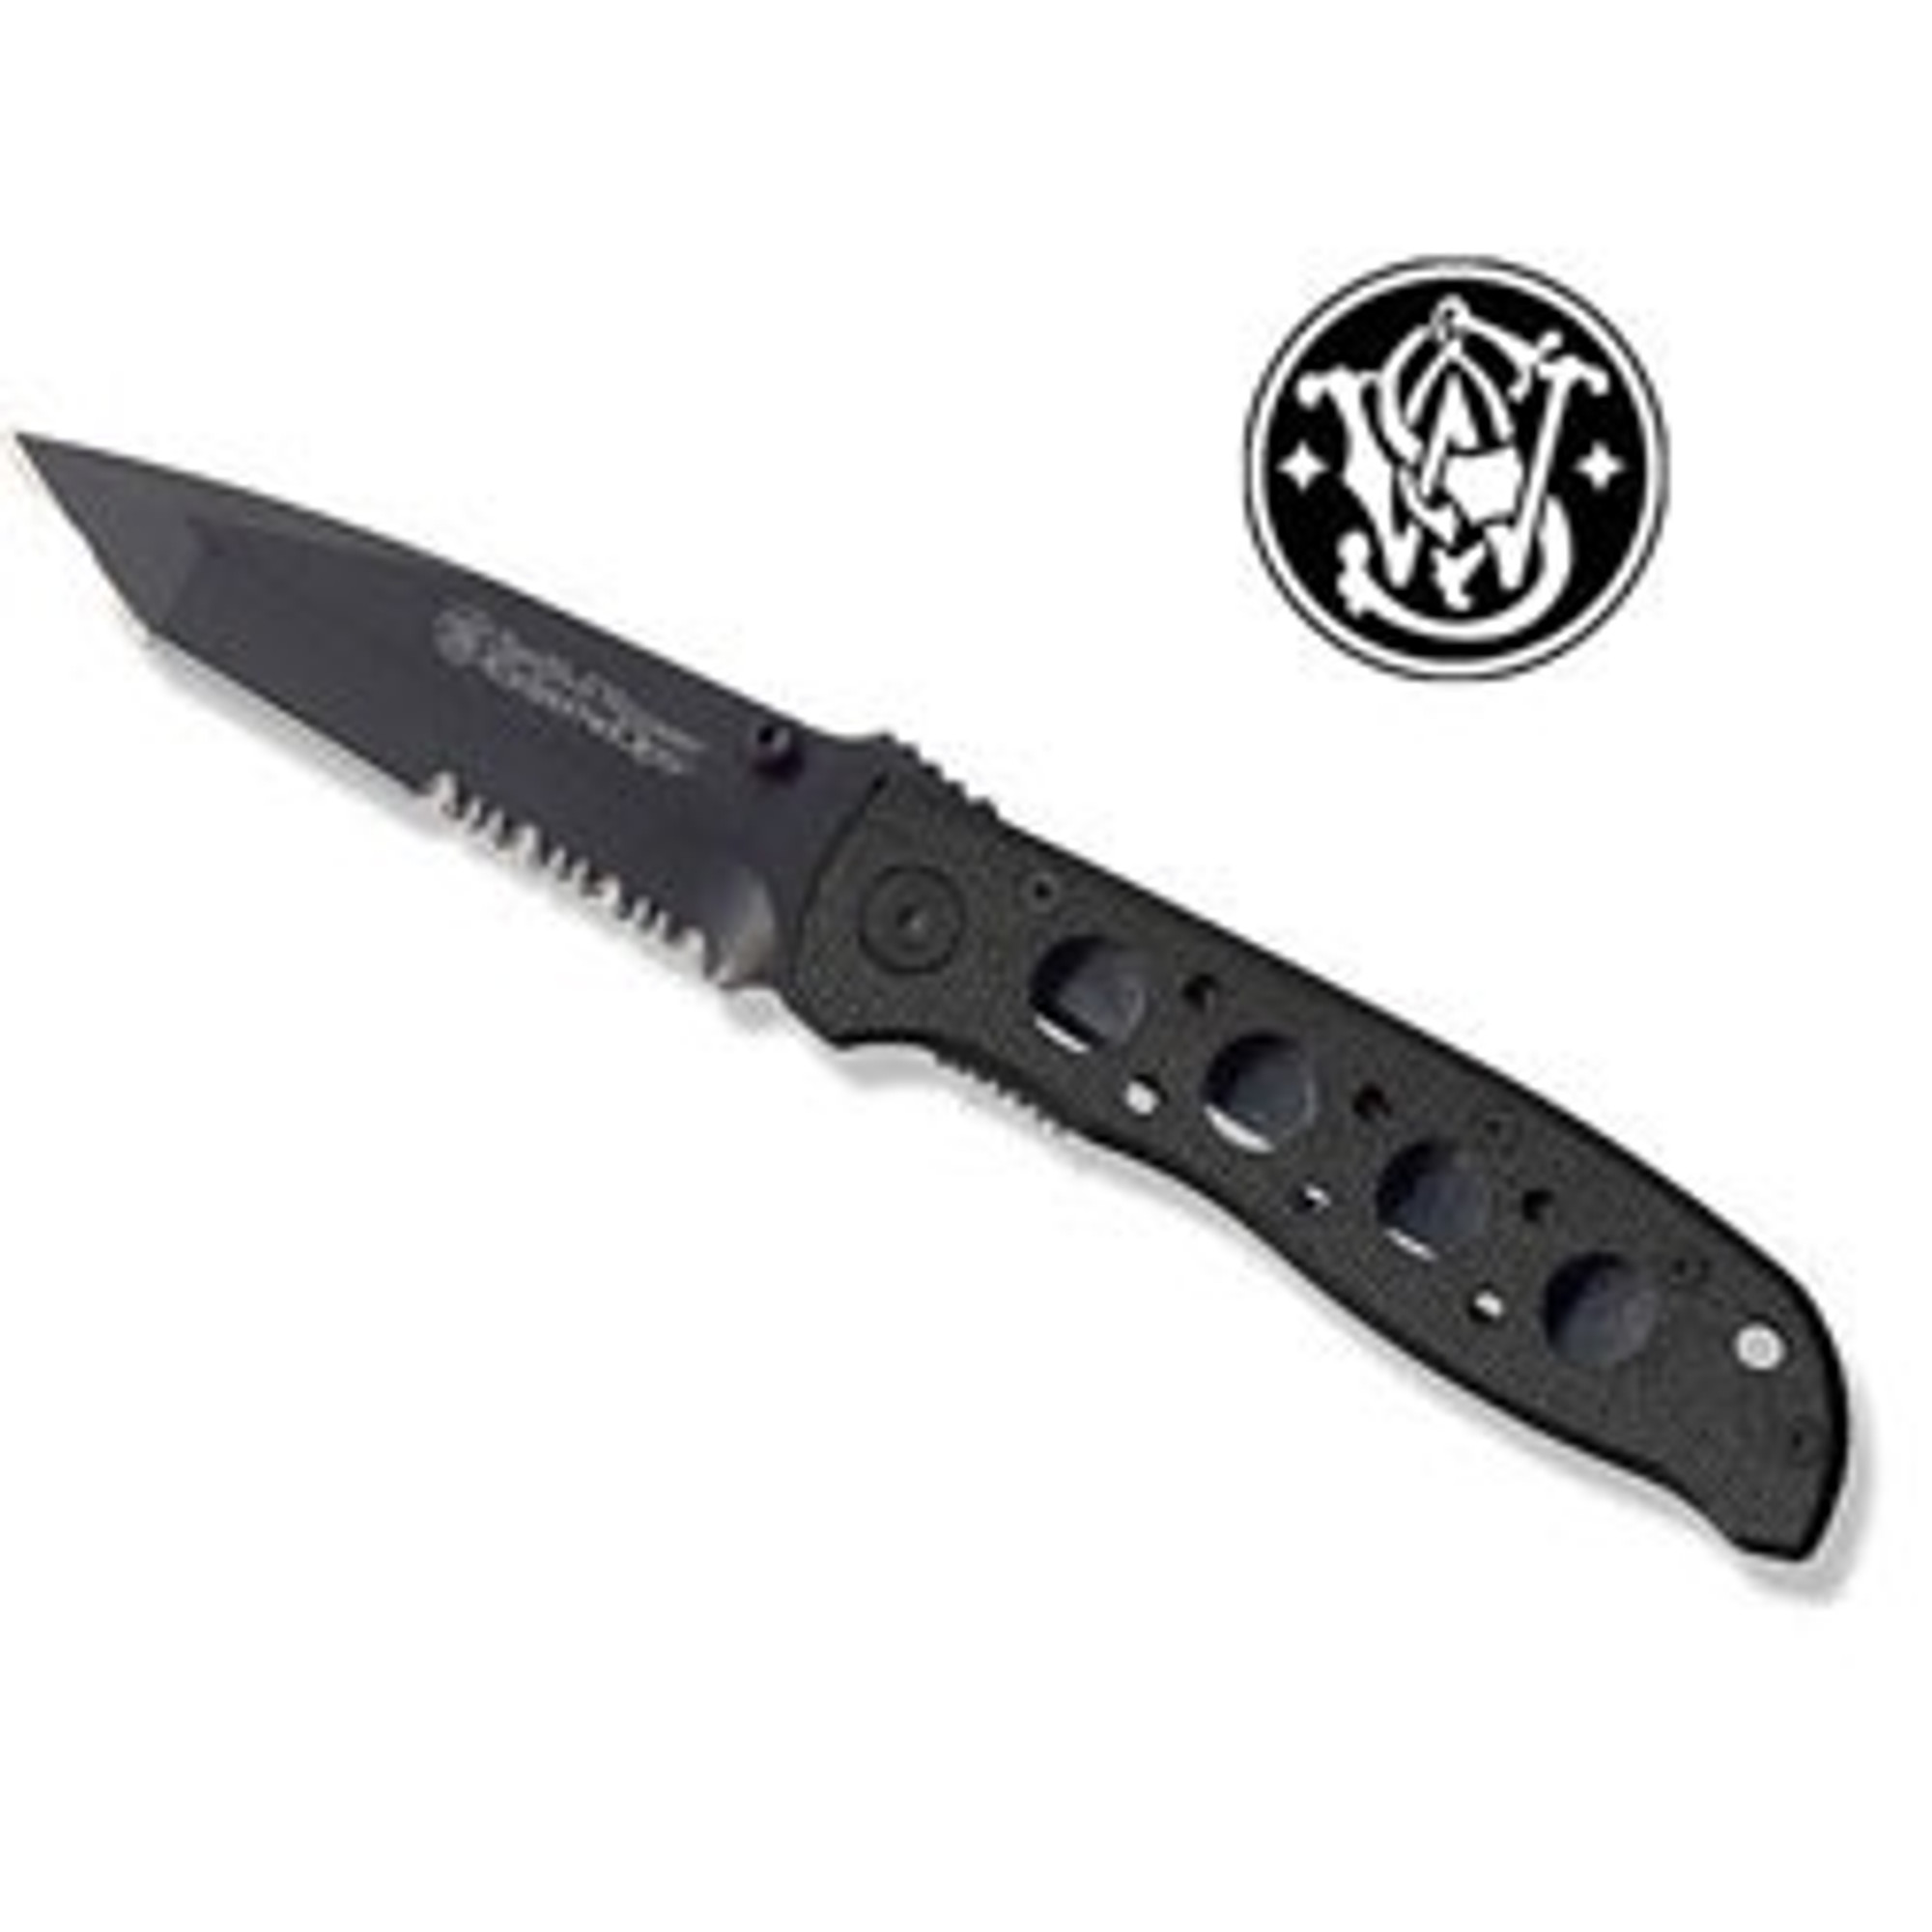 Smith & Wesson Bullseye Extreme Ops w/Serrated Blade - Black